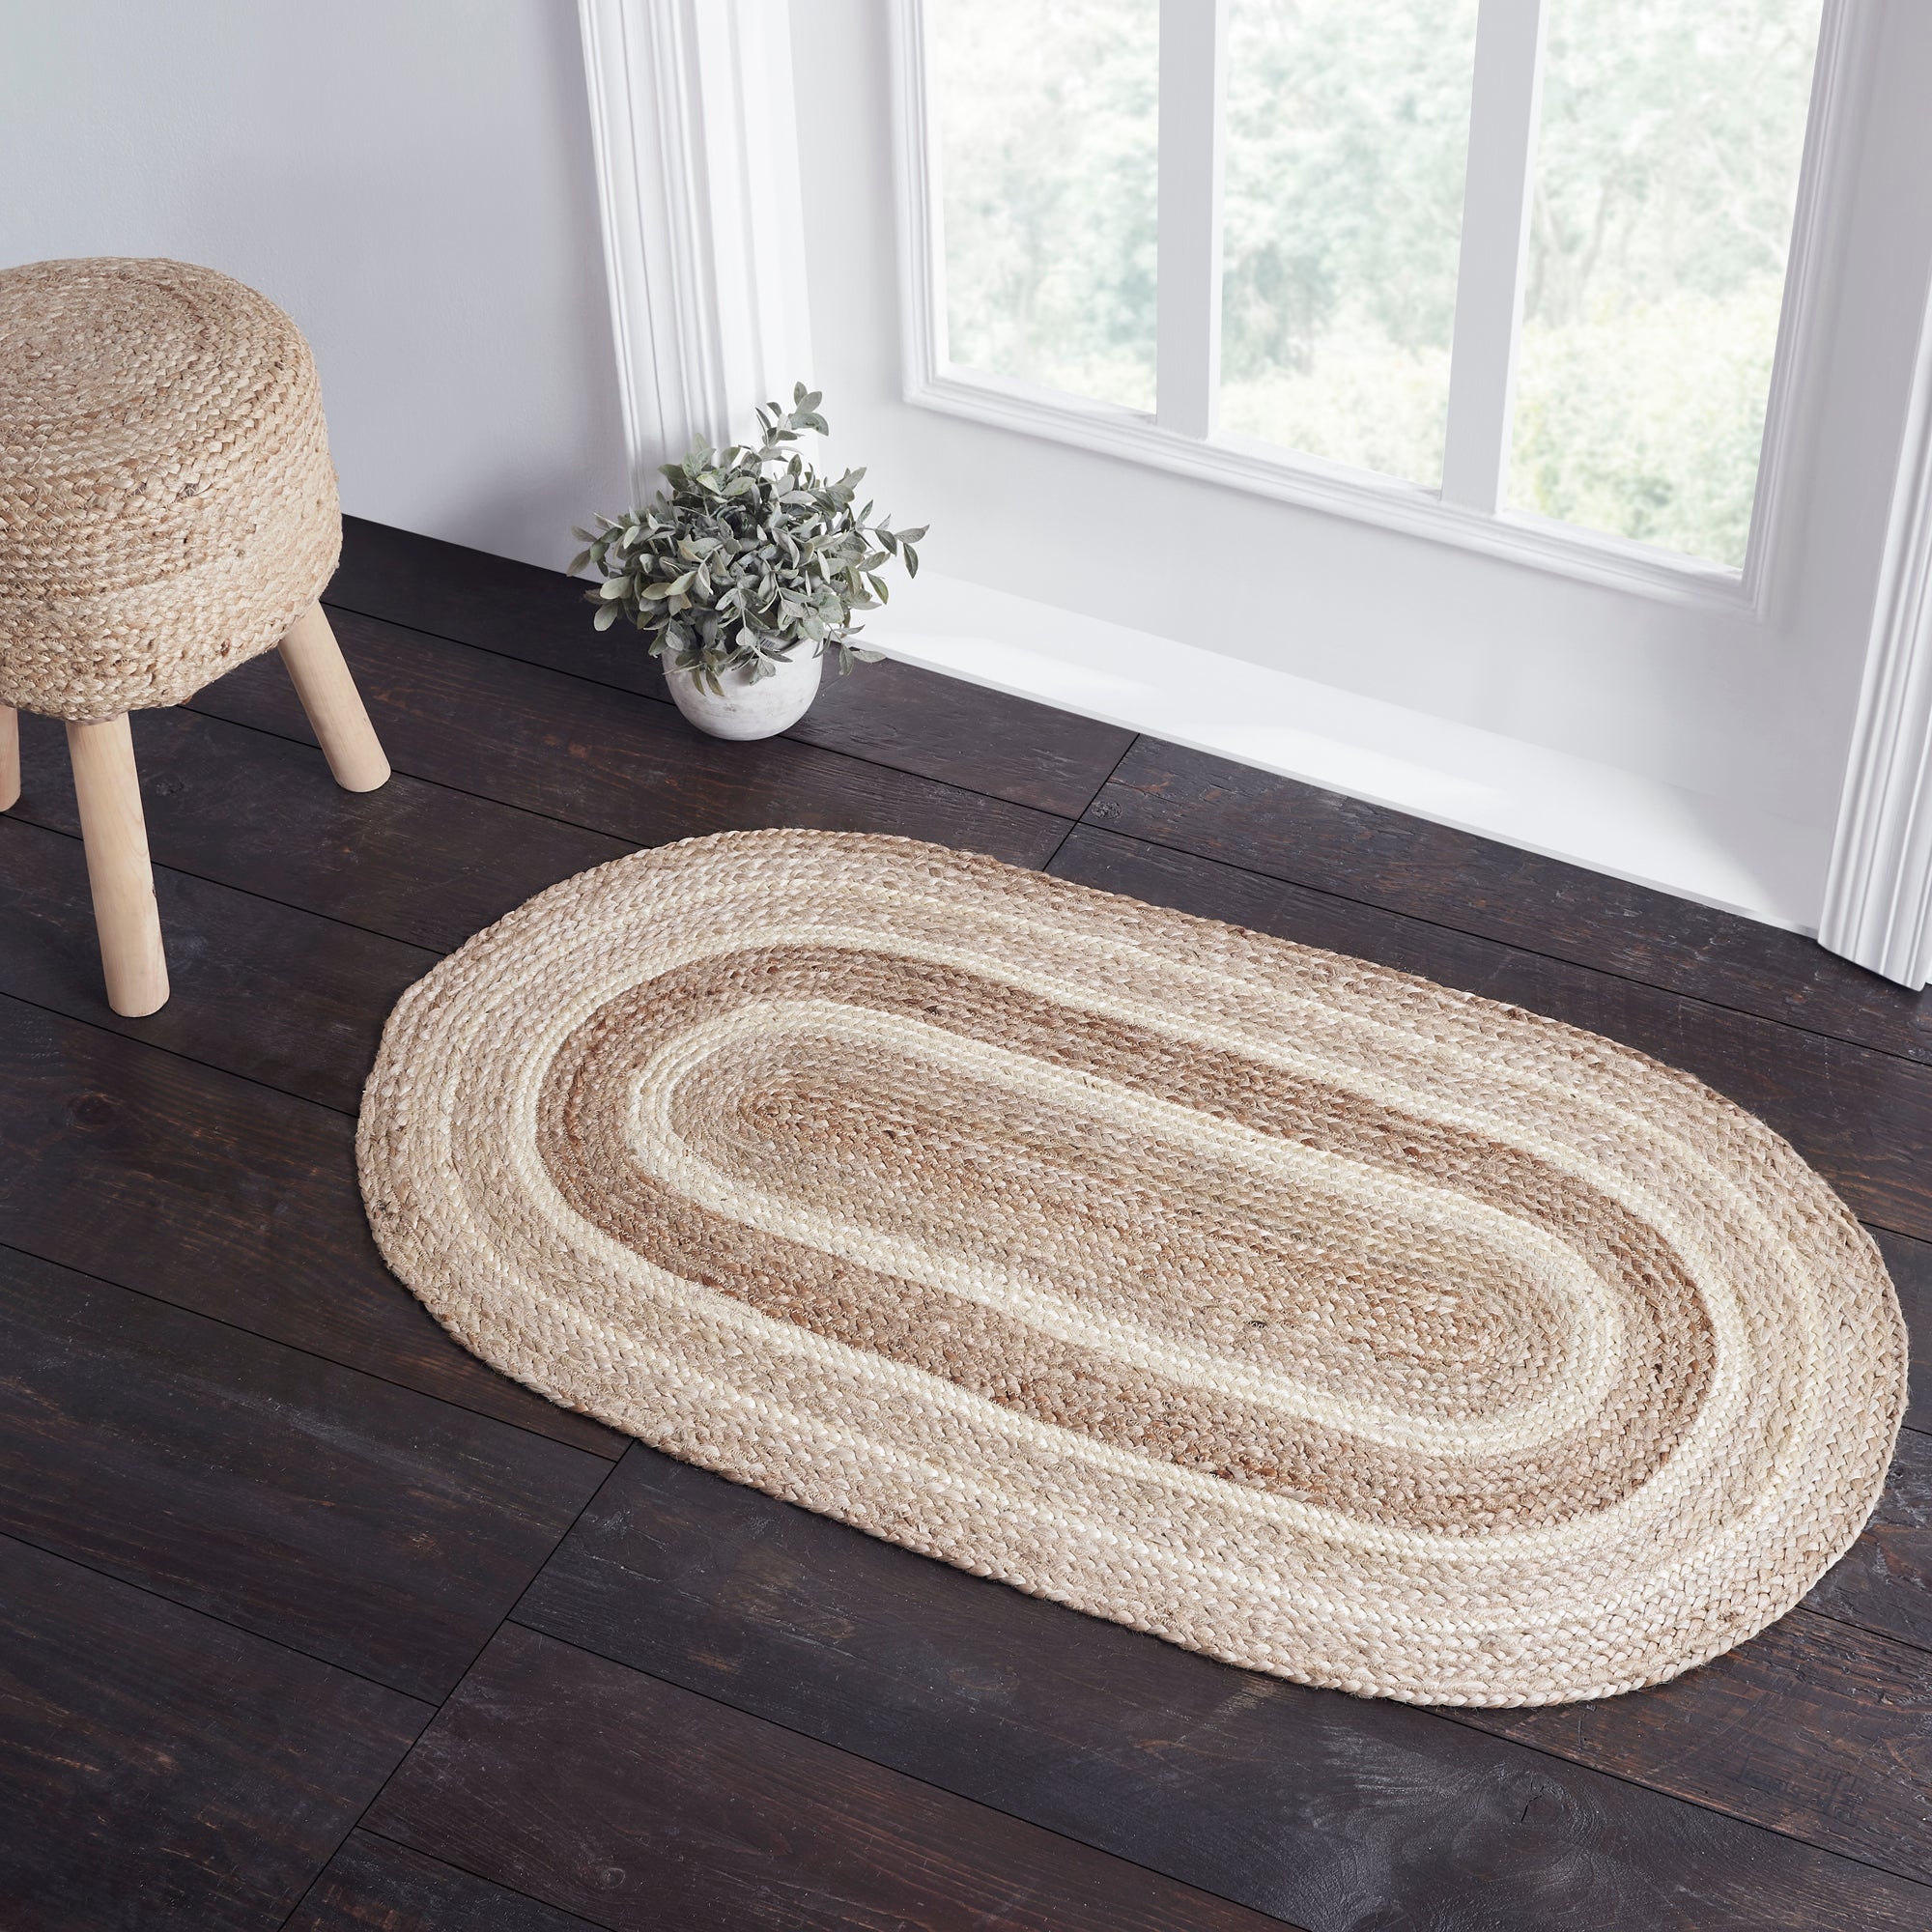 VHC Brands - Kaila Jute Rug Oval with Pad 27x48